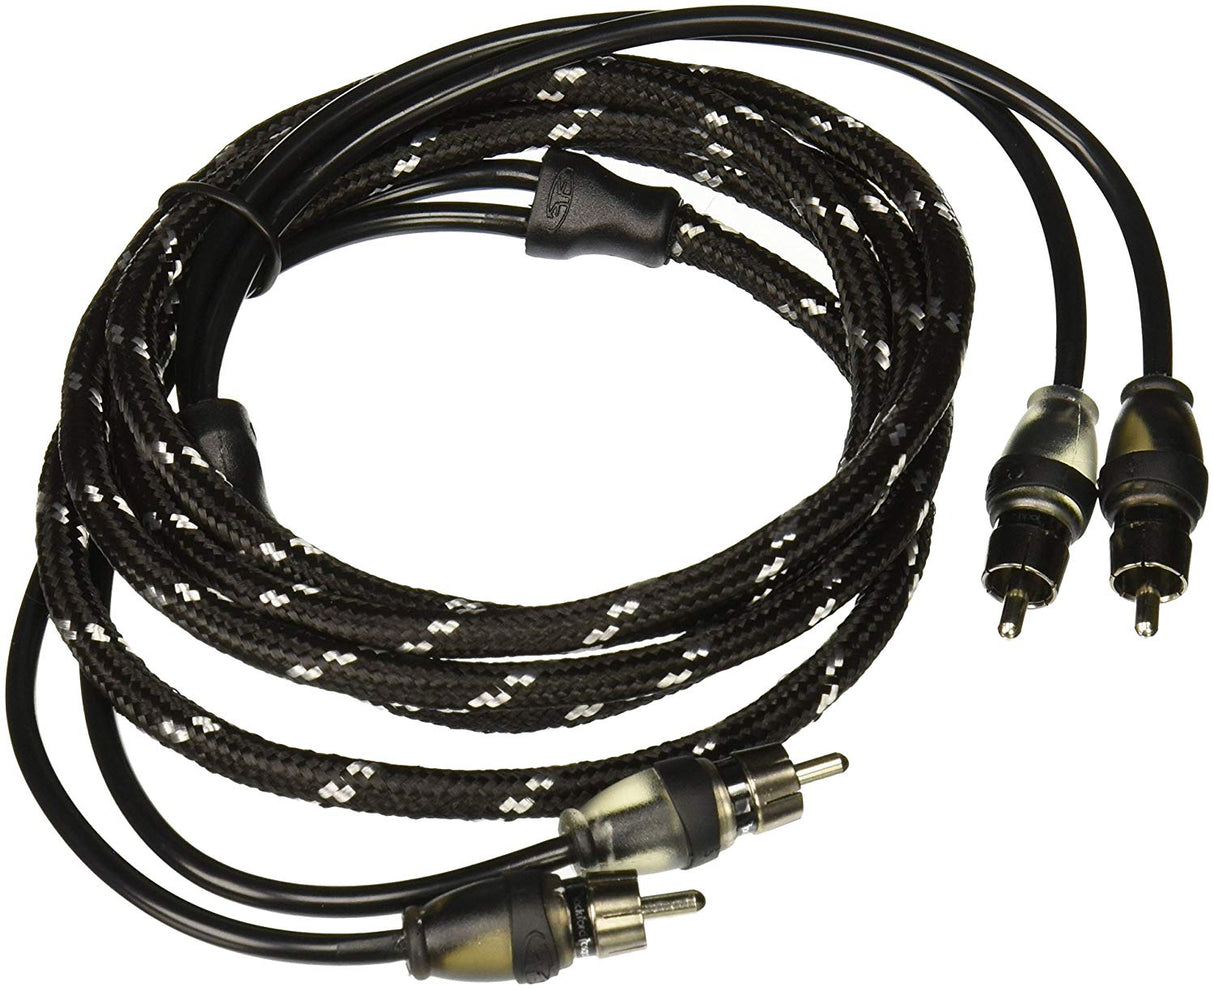 RFIT Series RCA Cable - 6 Feet (1.8m)